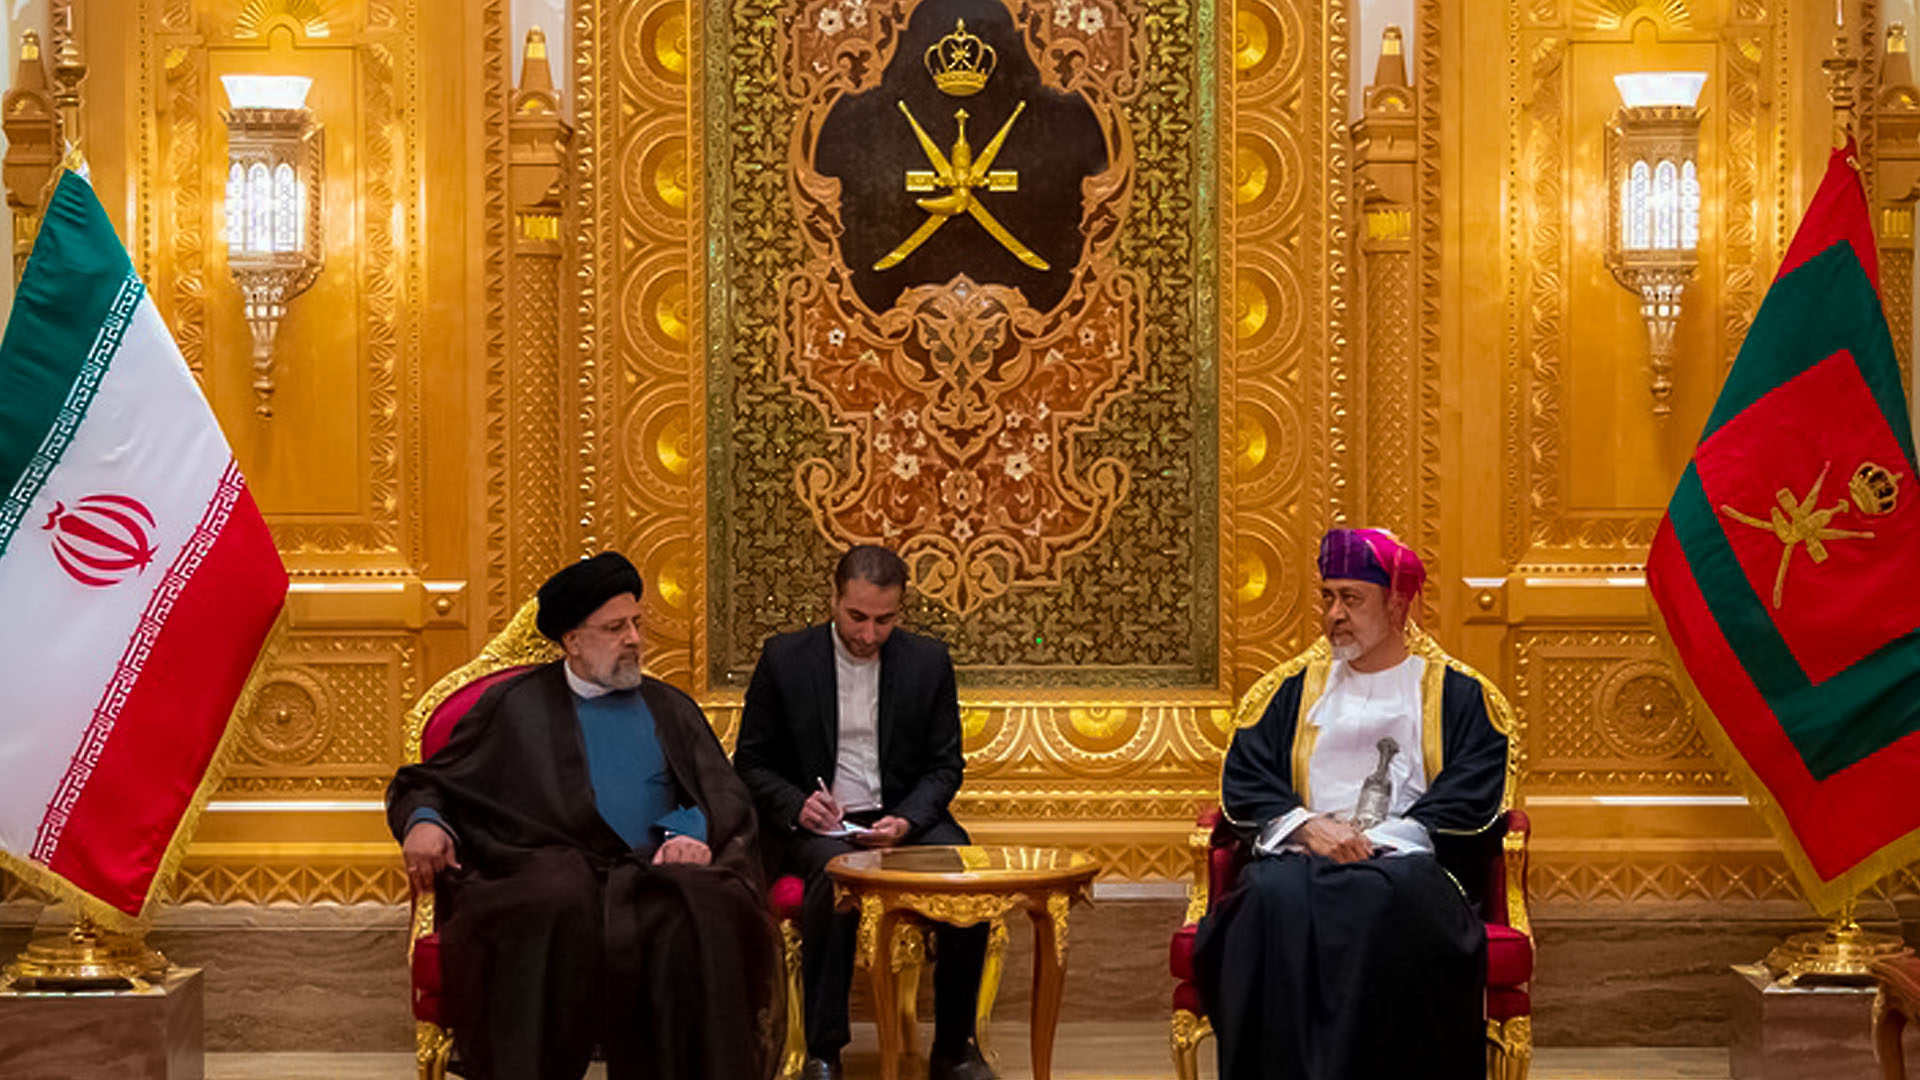 Iranian President and Sultan of Oman hold official talks